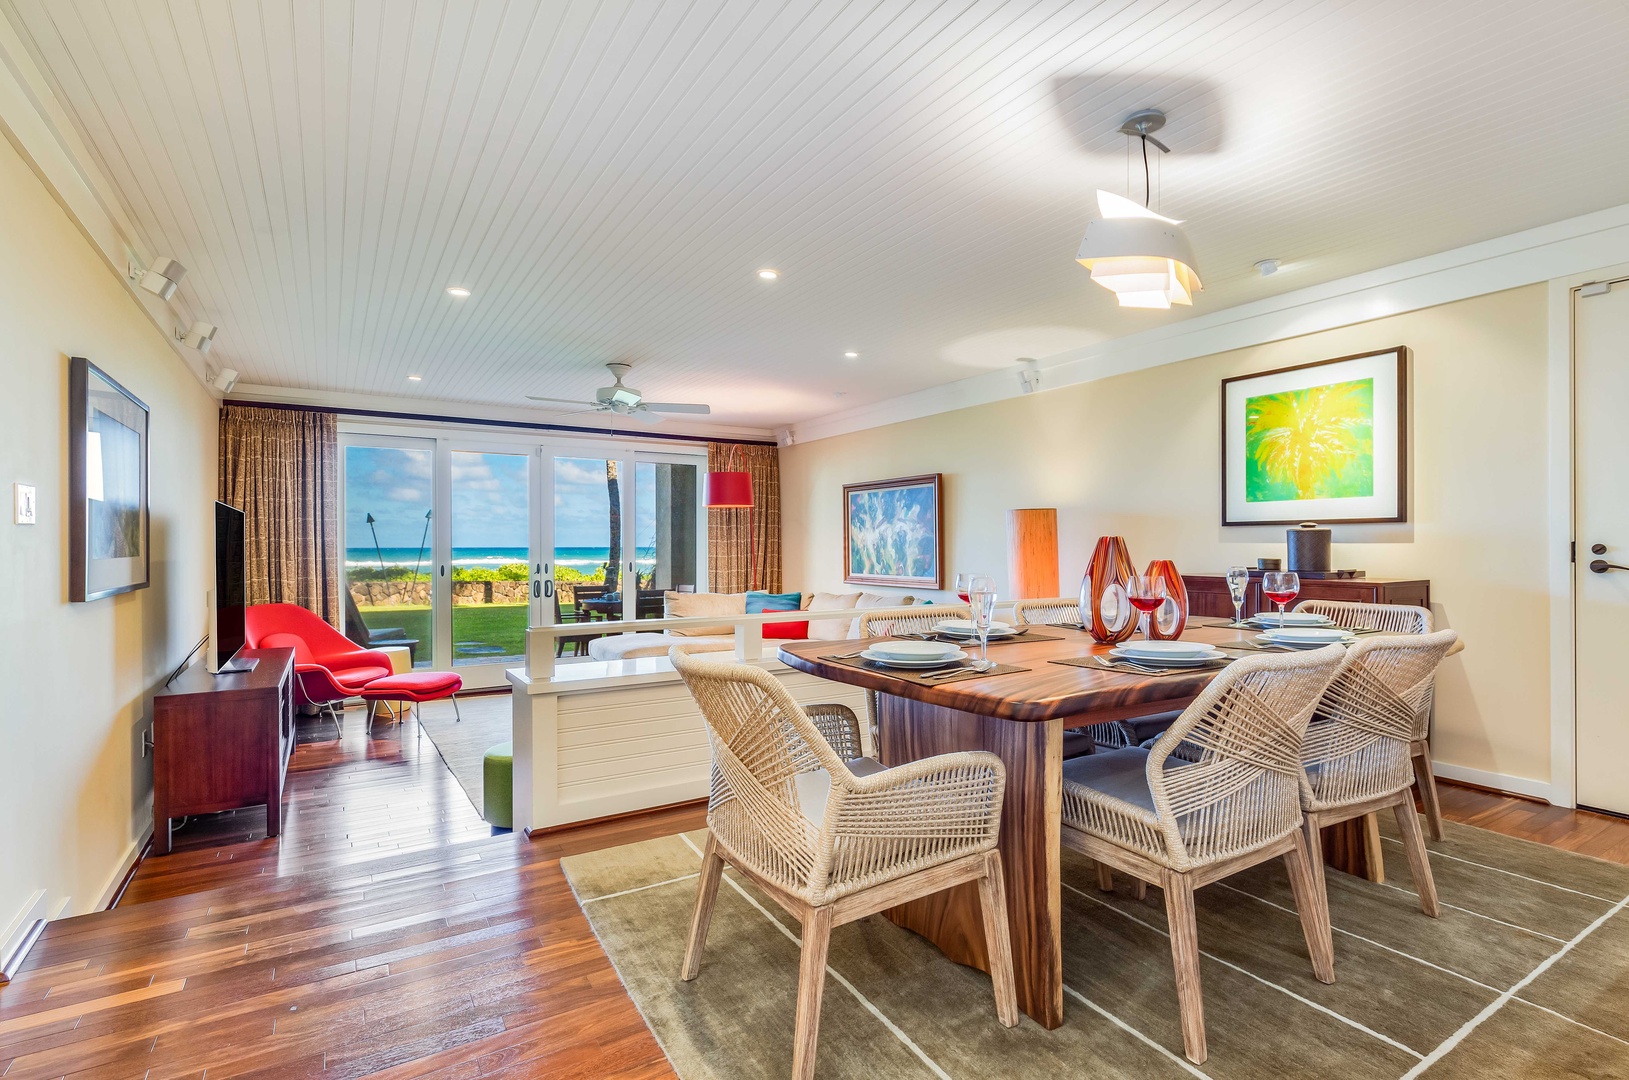 Kahuku Vacation Rentals, Turtle Bay Villas 116 - Open-concept living and dining with a view